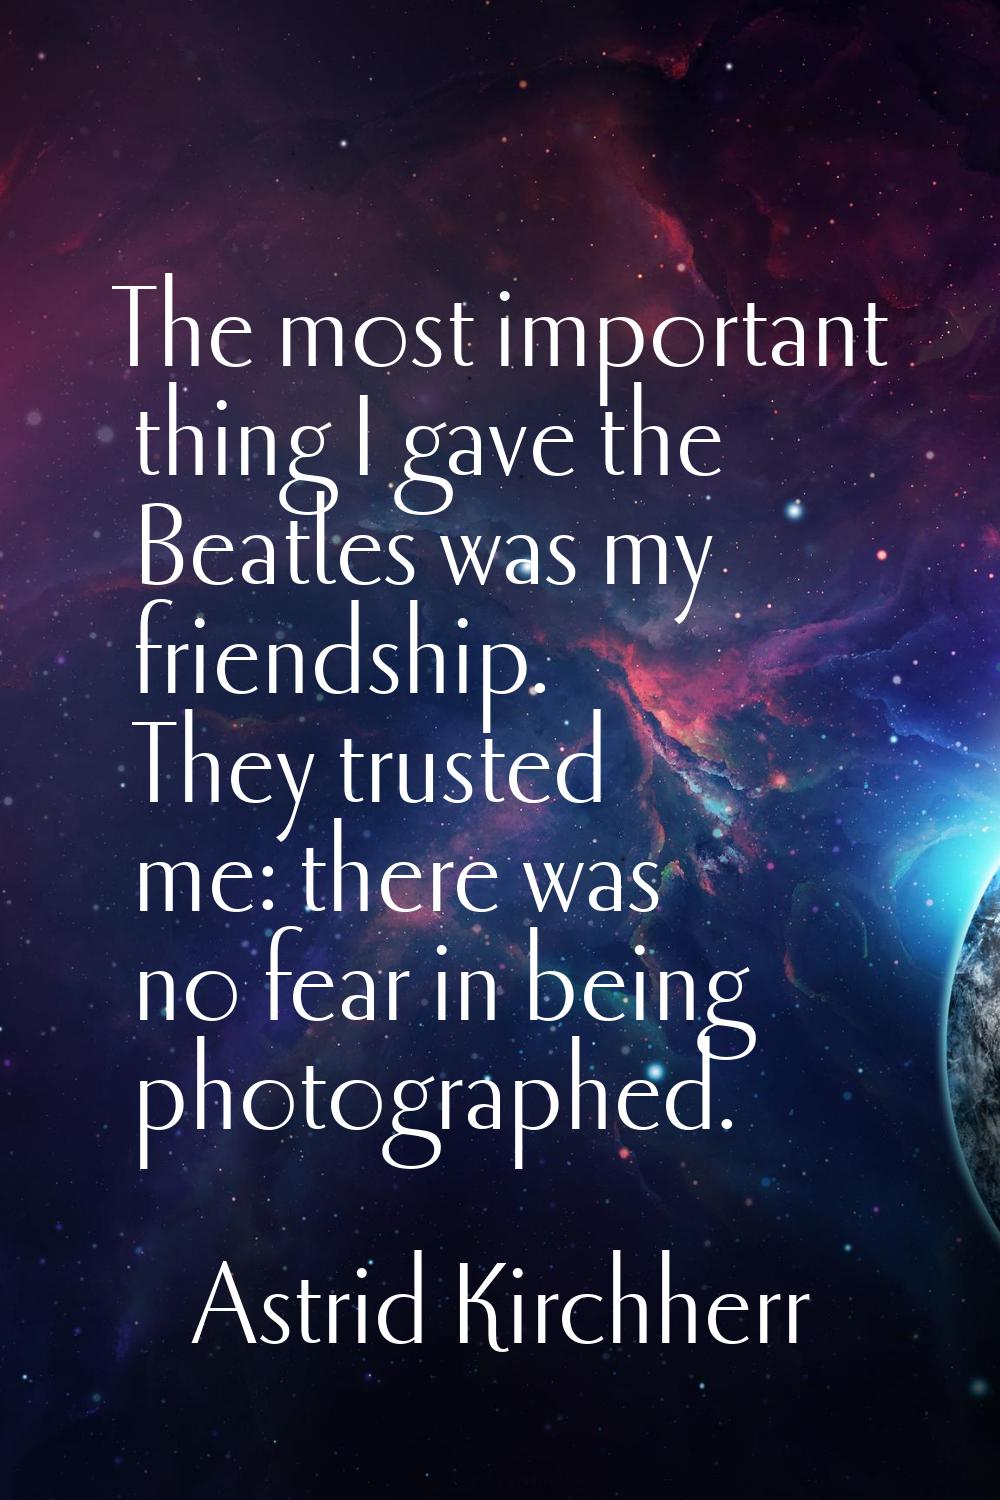 The most important thing I gave the Beatles was my friendship. They trusted me: there was no fear i